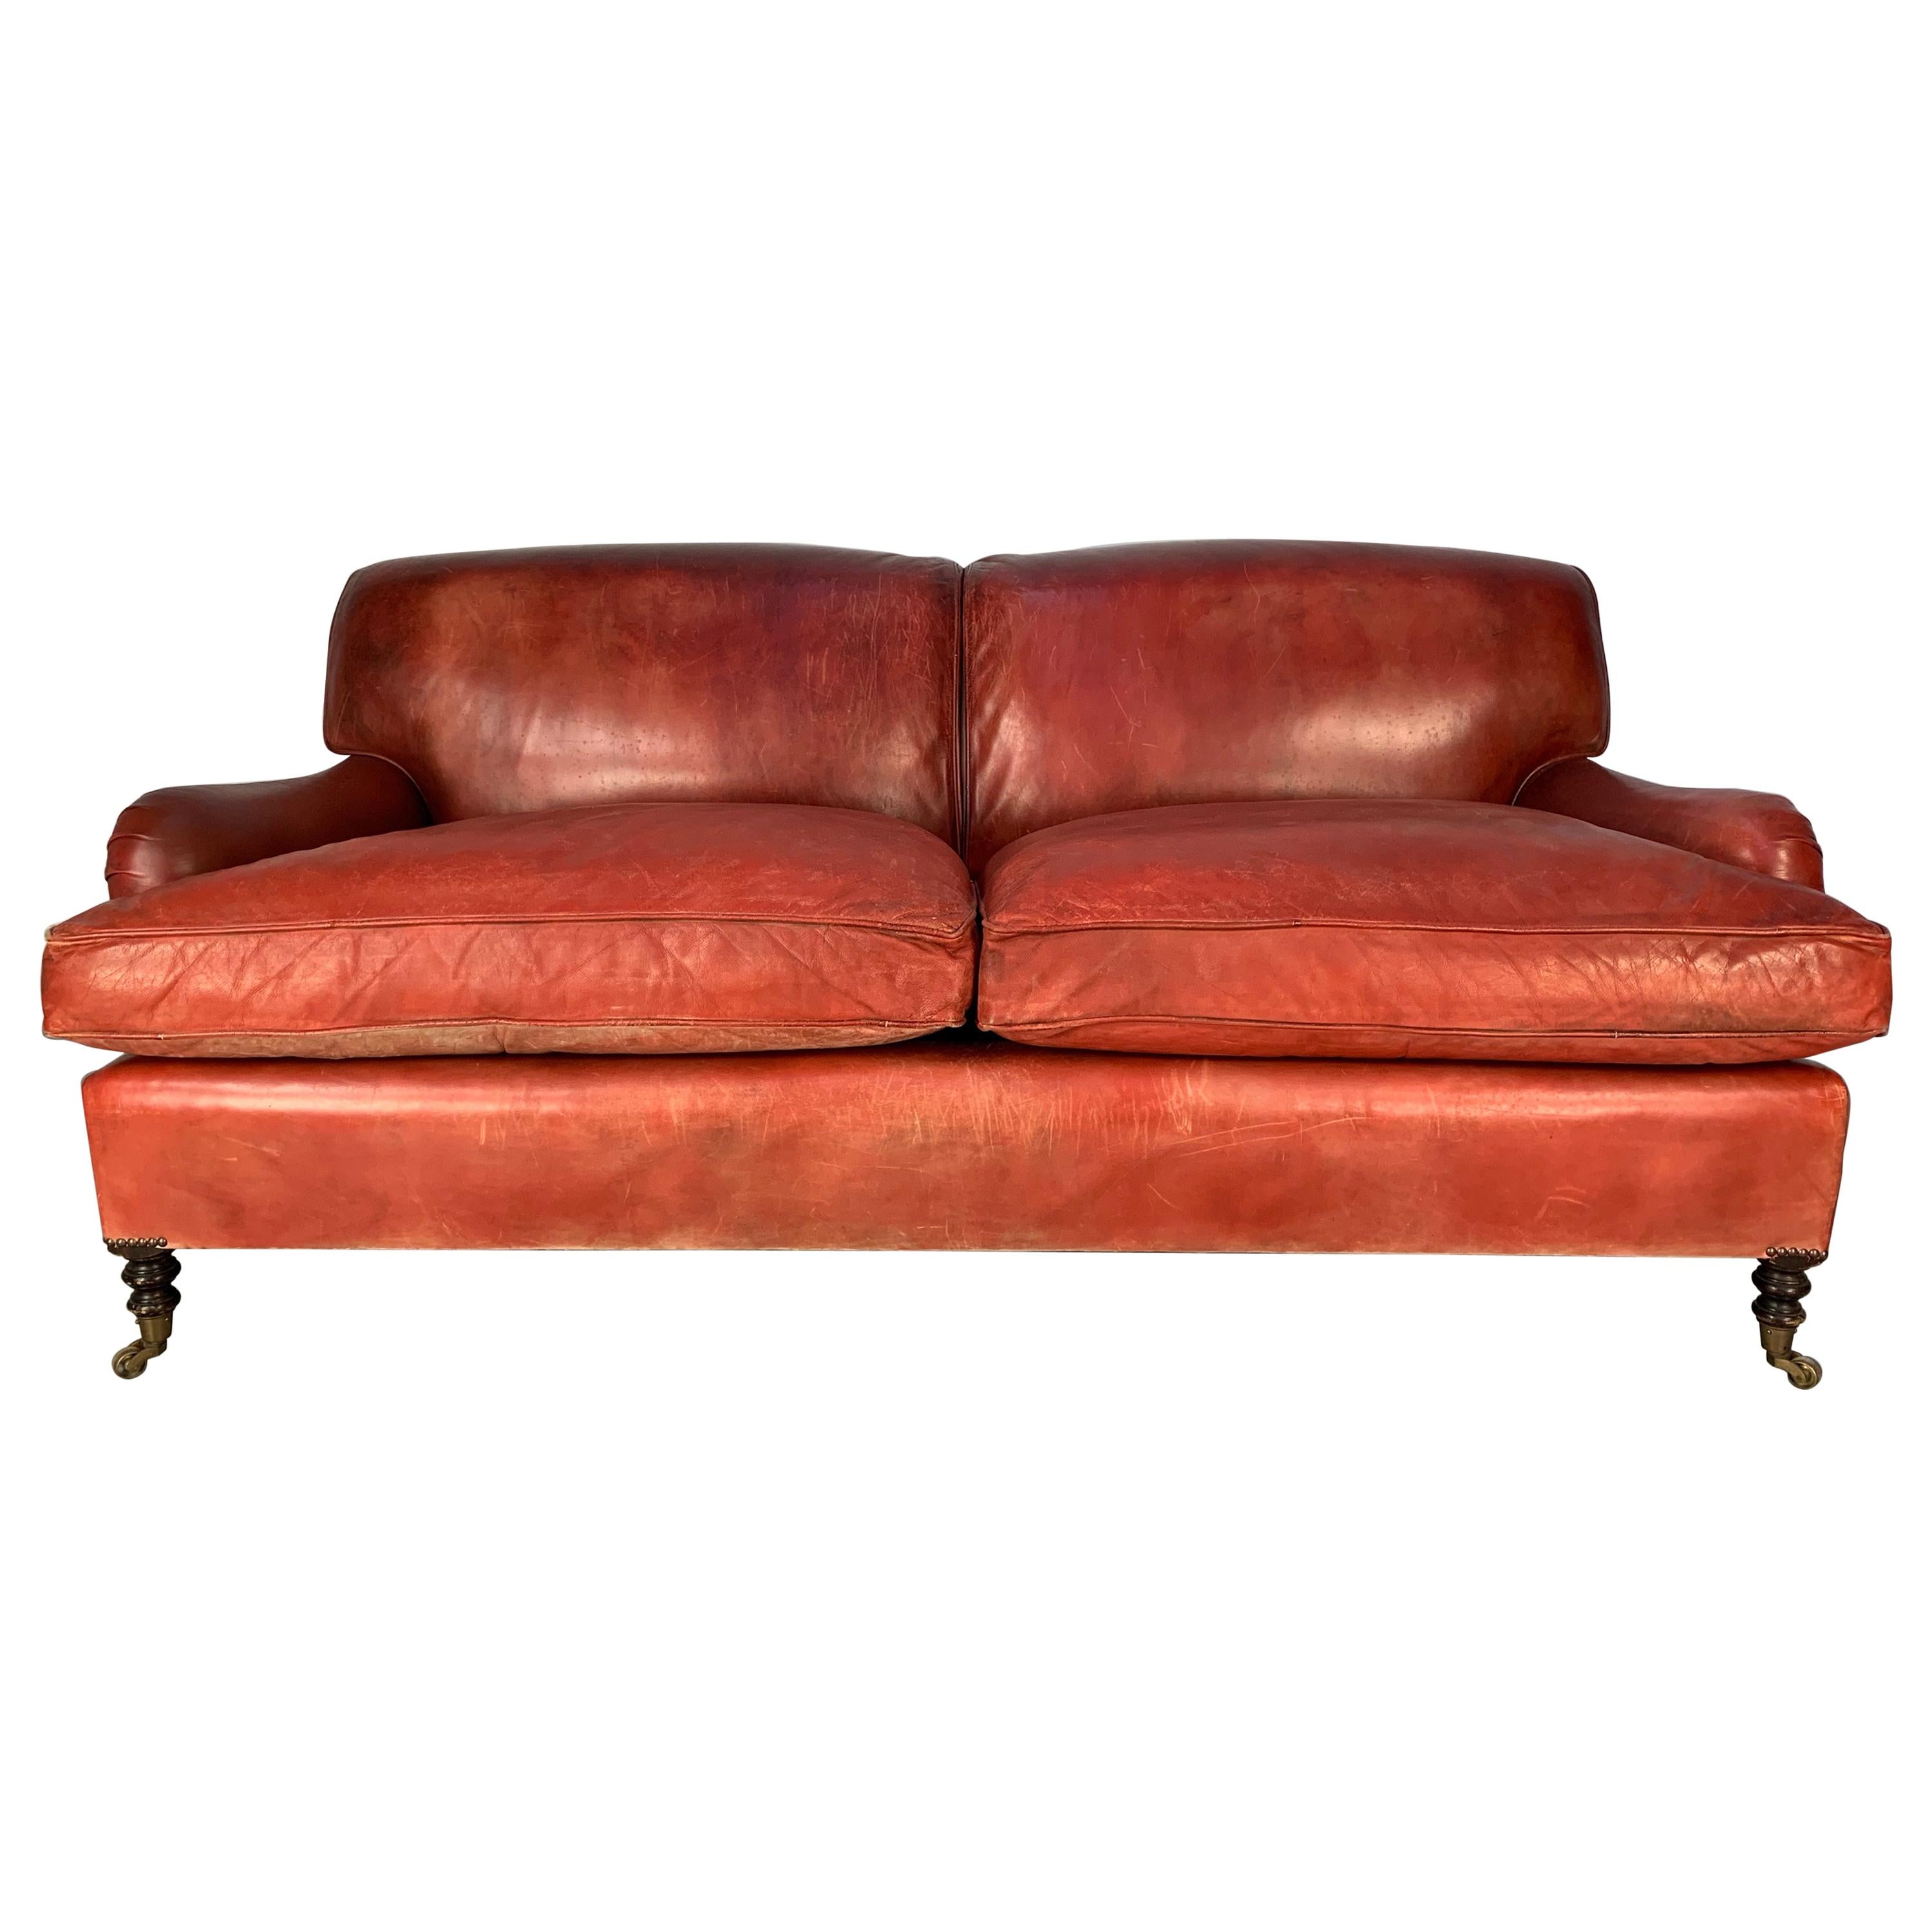 George Smith “Signature" Standard-Arm Large Sofa in Oxblood Leather